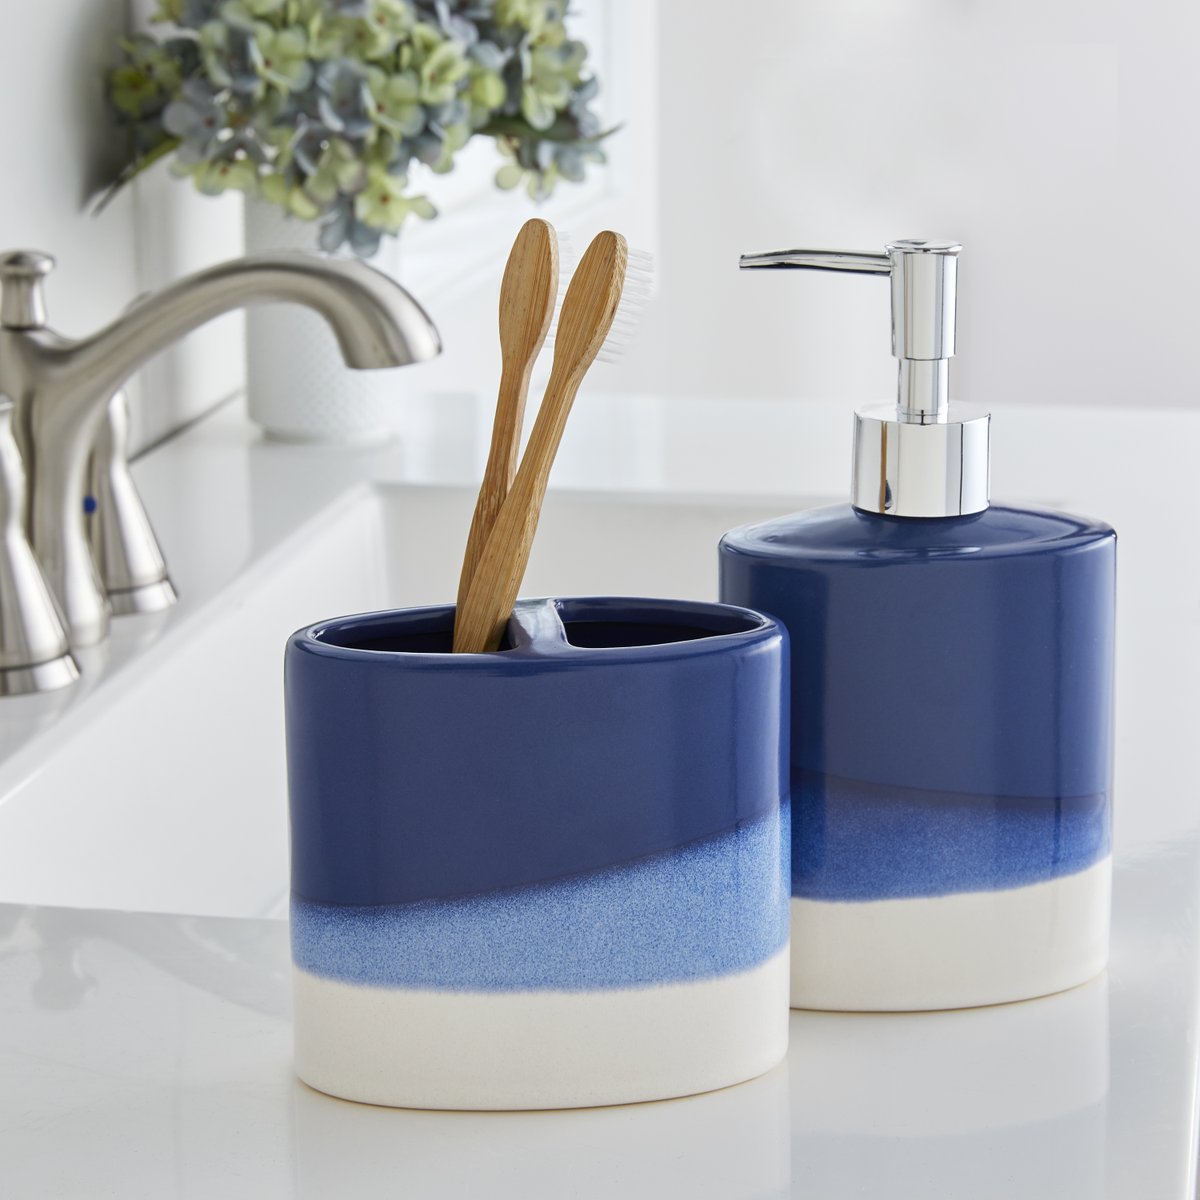 A wave of blue 🌊 Brighten up your space with beautiful hues of blue. Shop Eckhart Stripe towels, Alanya accessories and more, bit.ly/3IASVSO #sklhome #bluehues #bluedecor #bathroomdecor